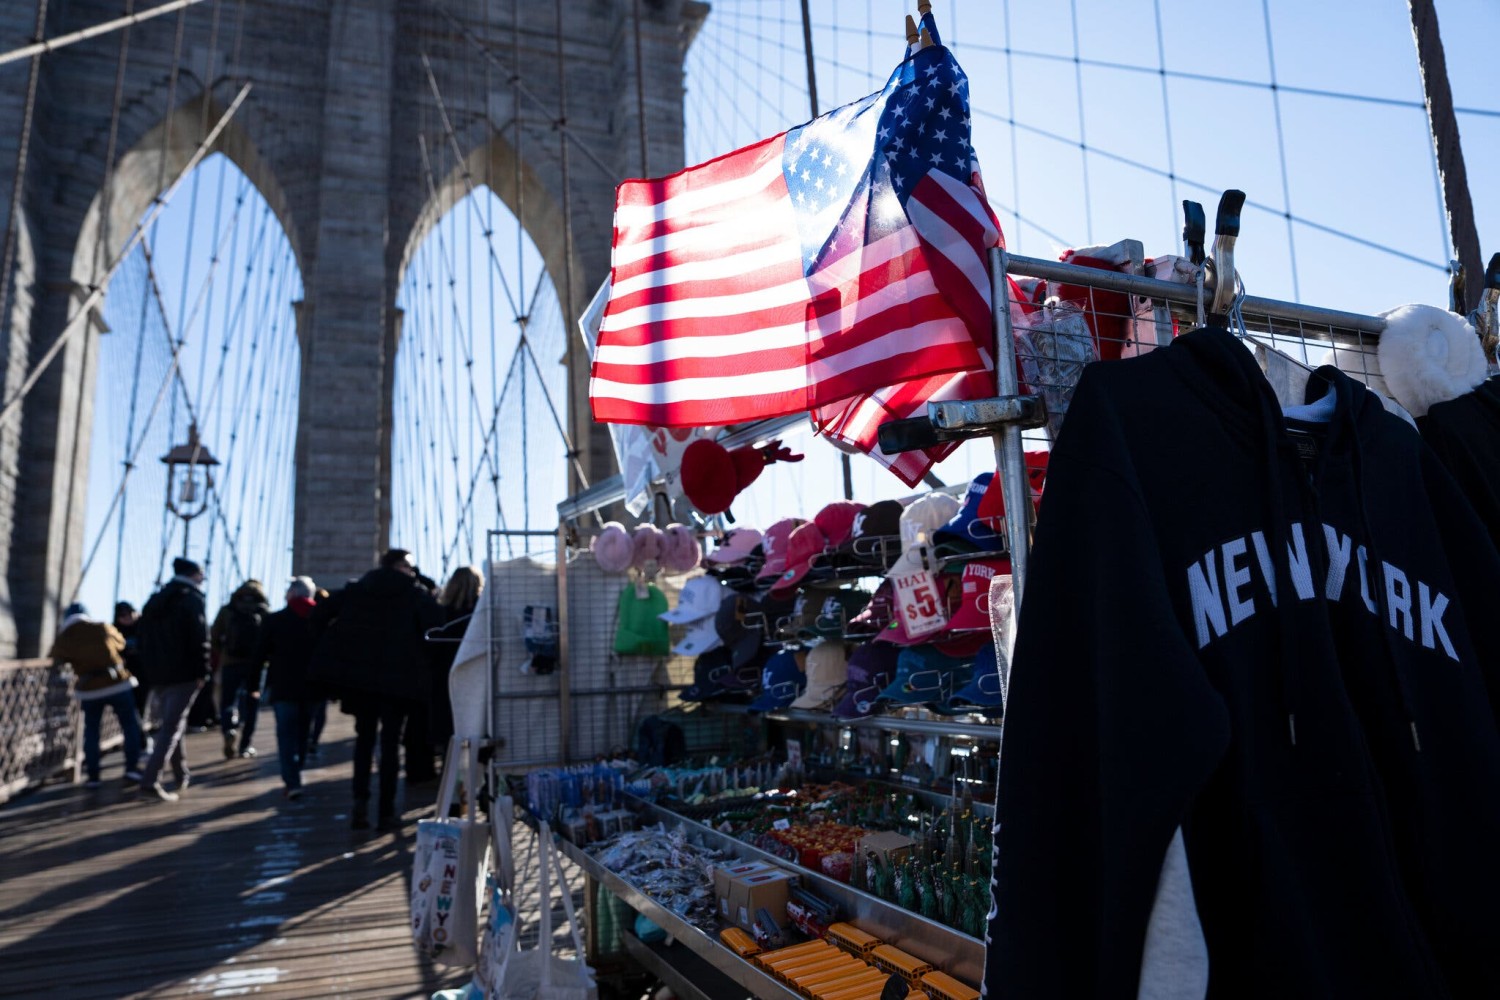 The Brooklyn Bridge Is Not for Sale, or for Selling Souvenirs Anymore